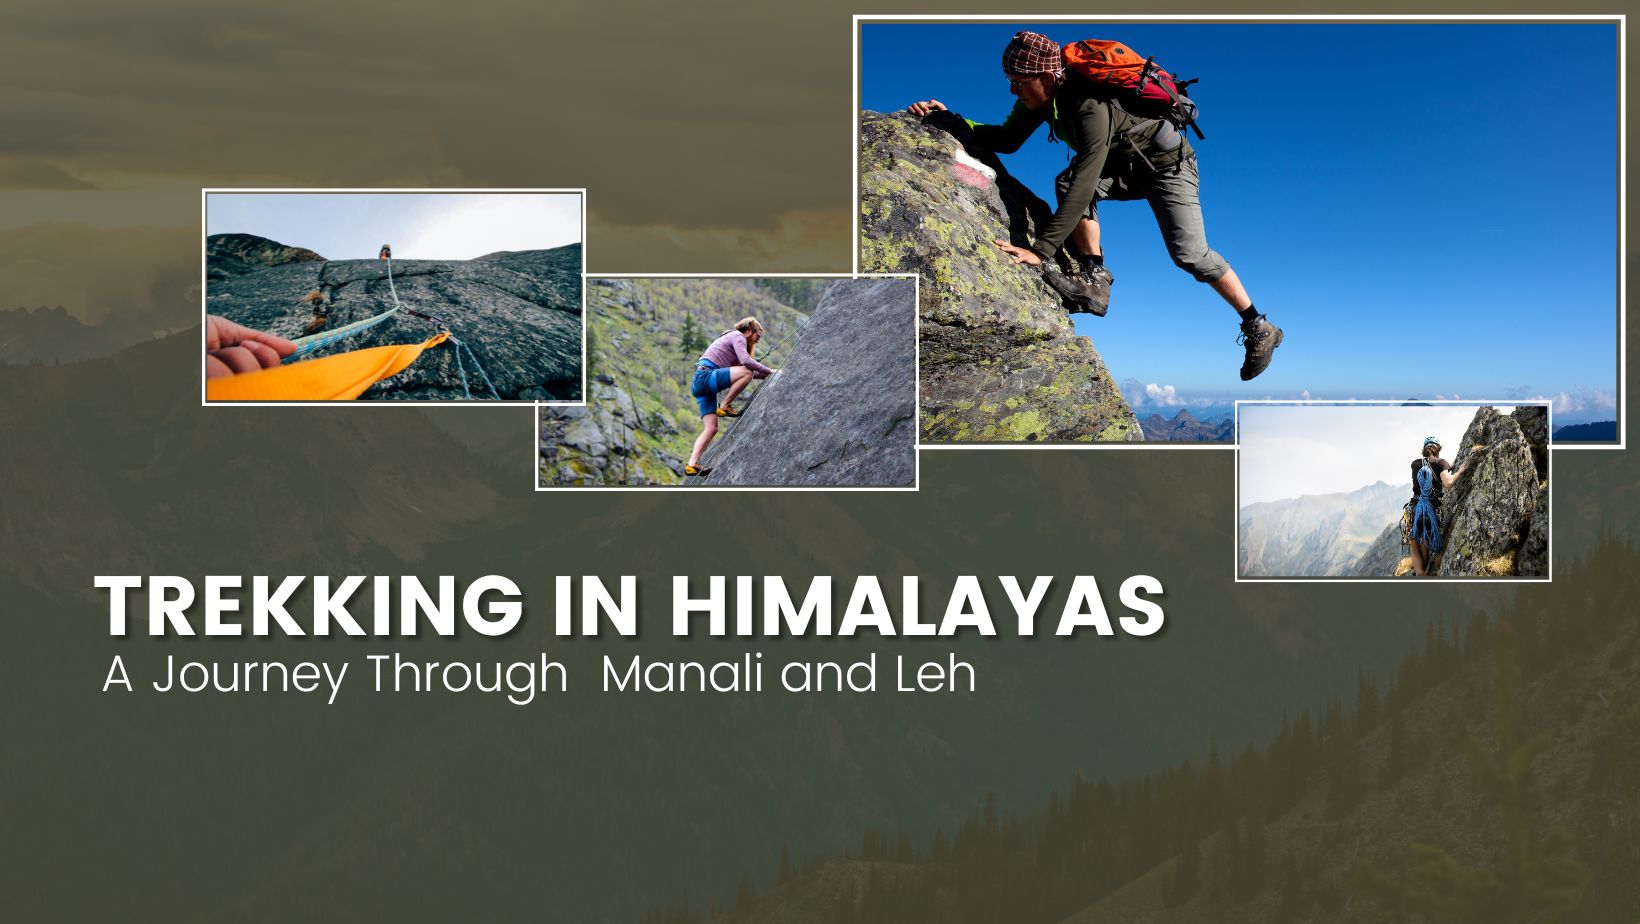 Trekking in Himalayas: A Journey Through Manali and Leh